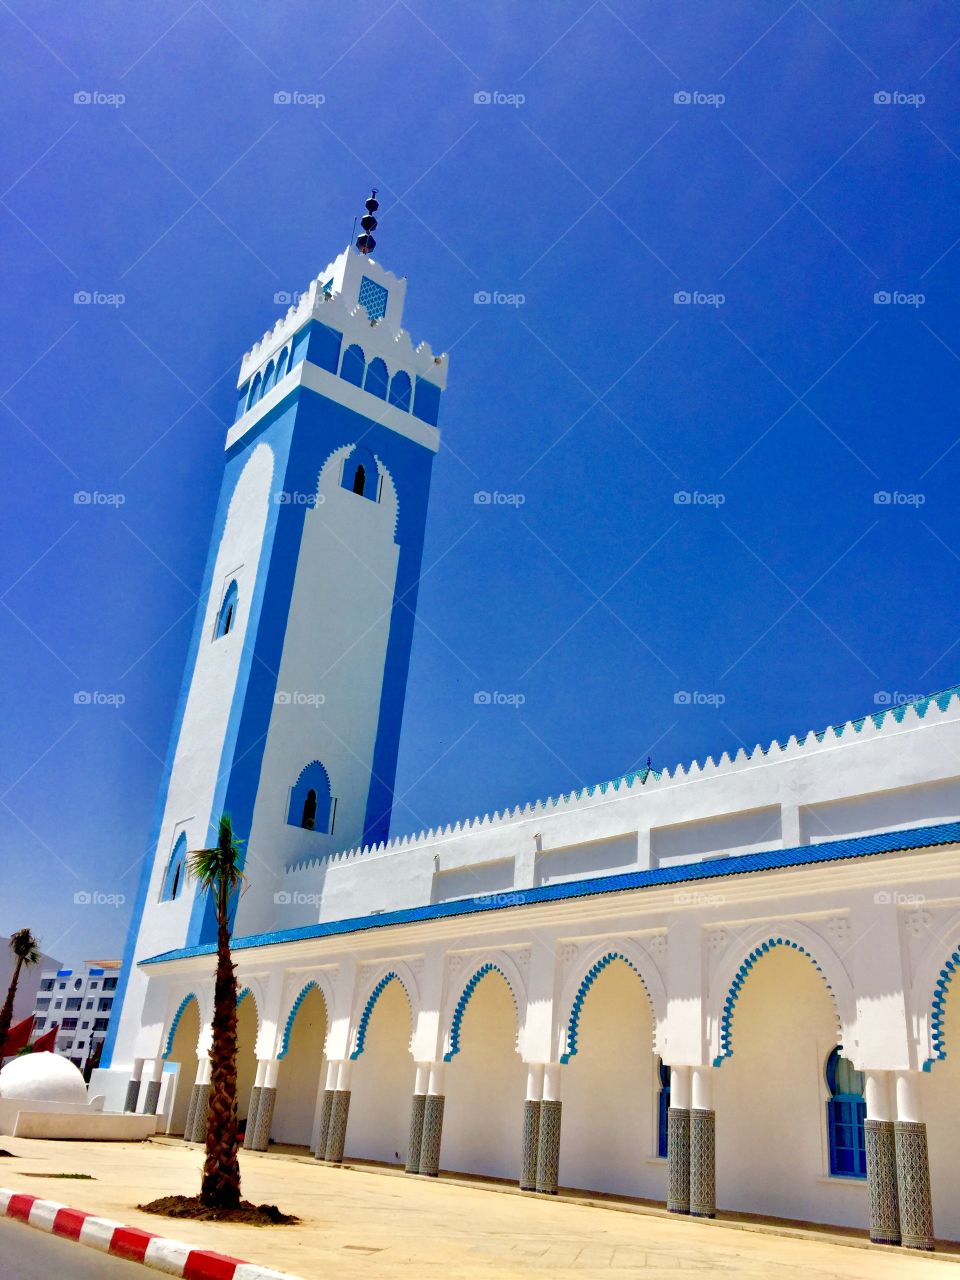 Be Inspired with The Moroccan MosQue .